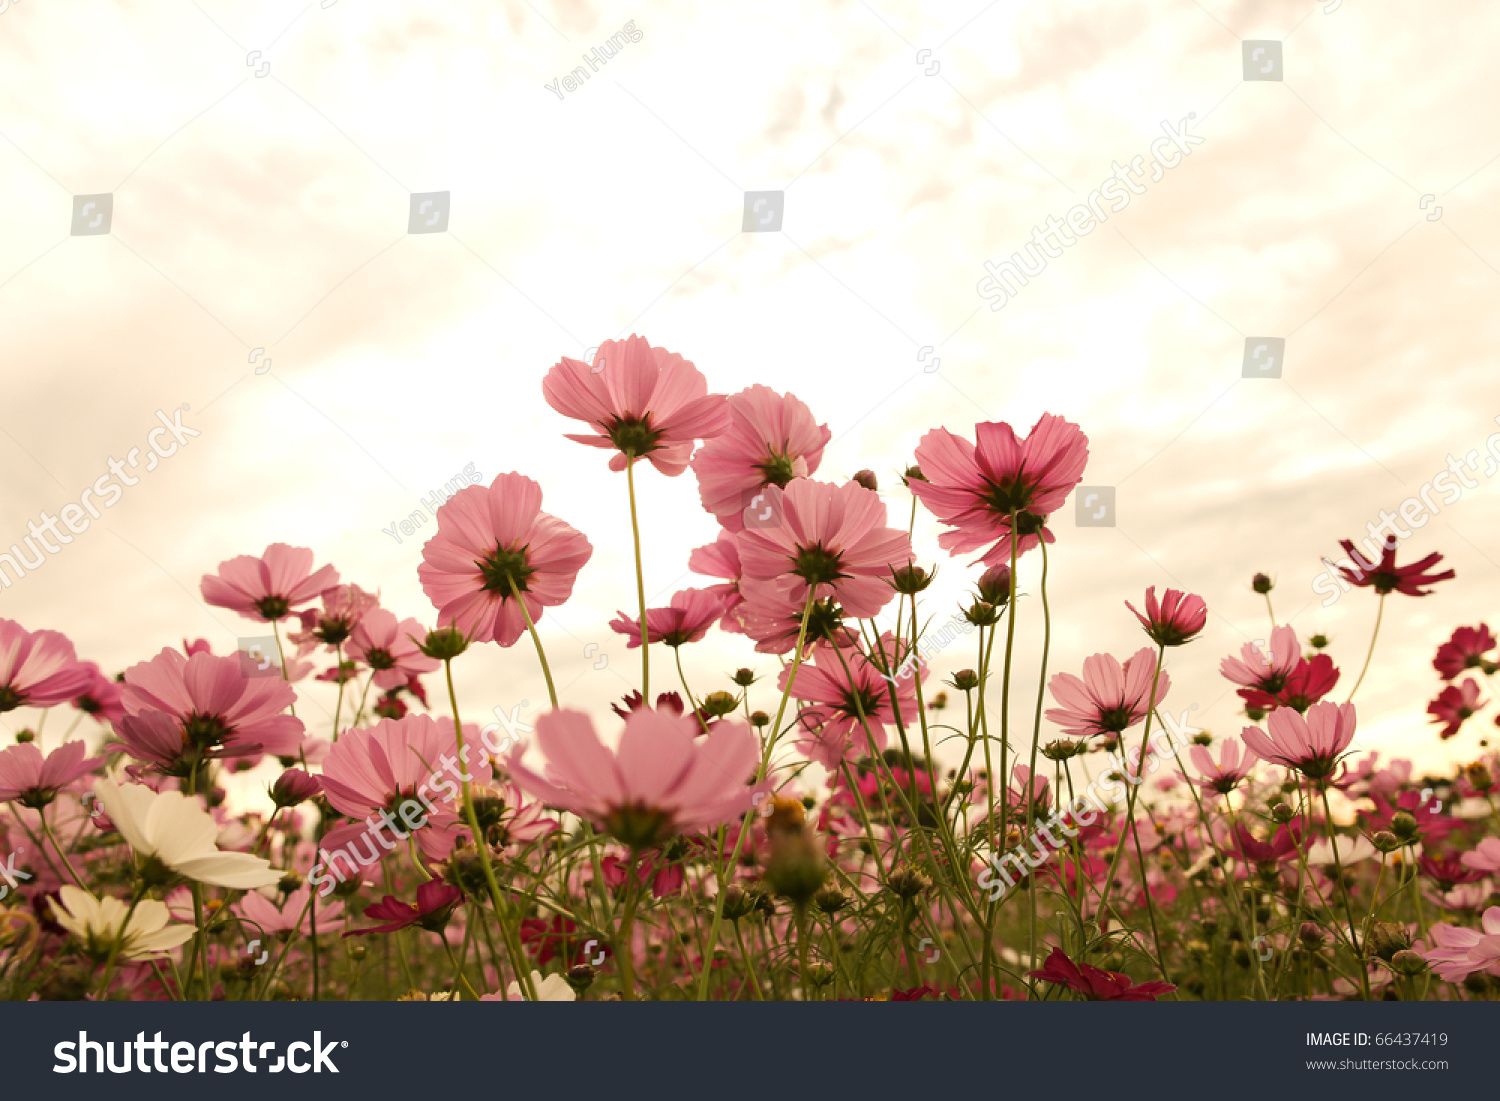 Cosmos flowers at sunset #66437419